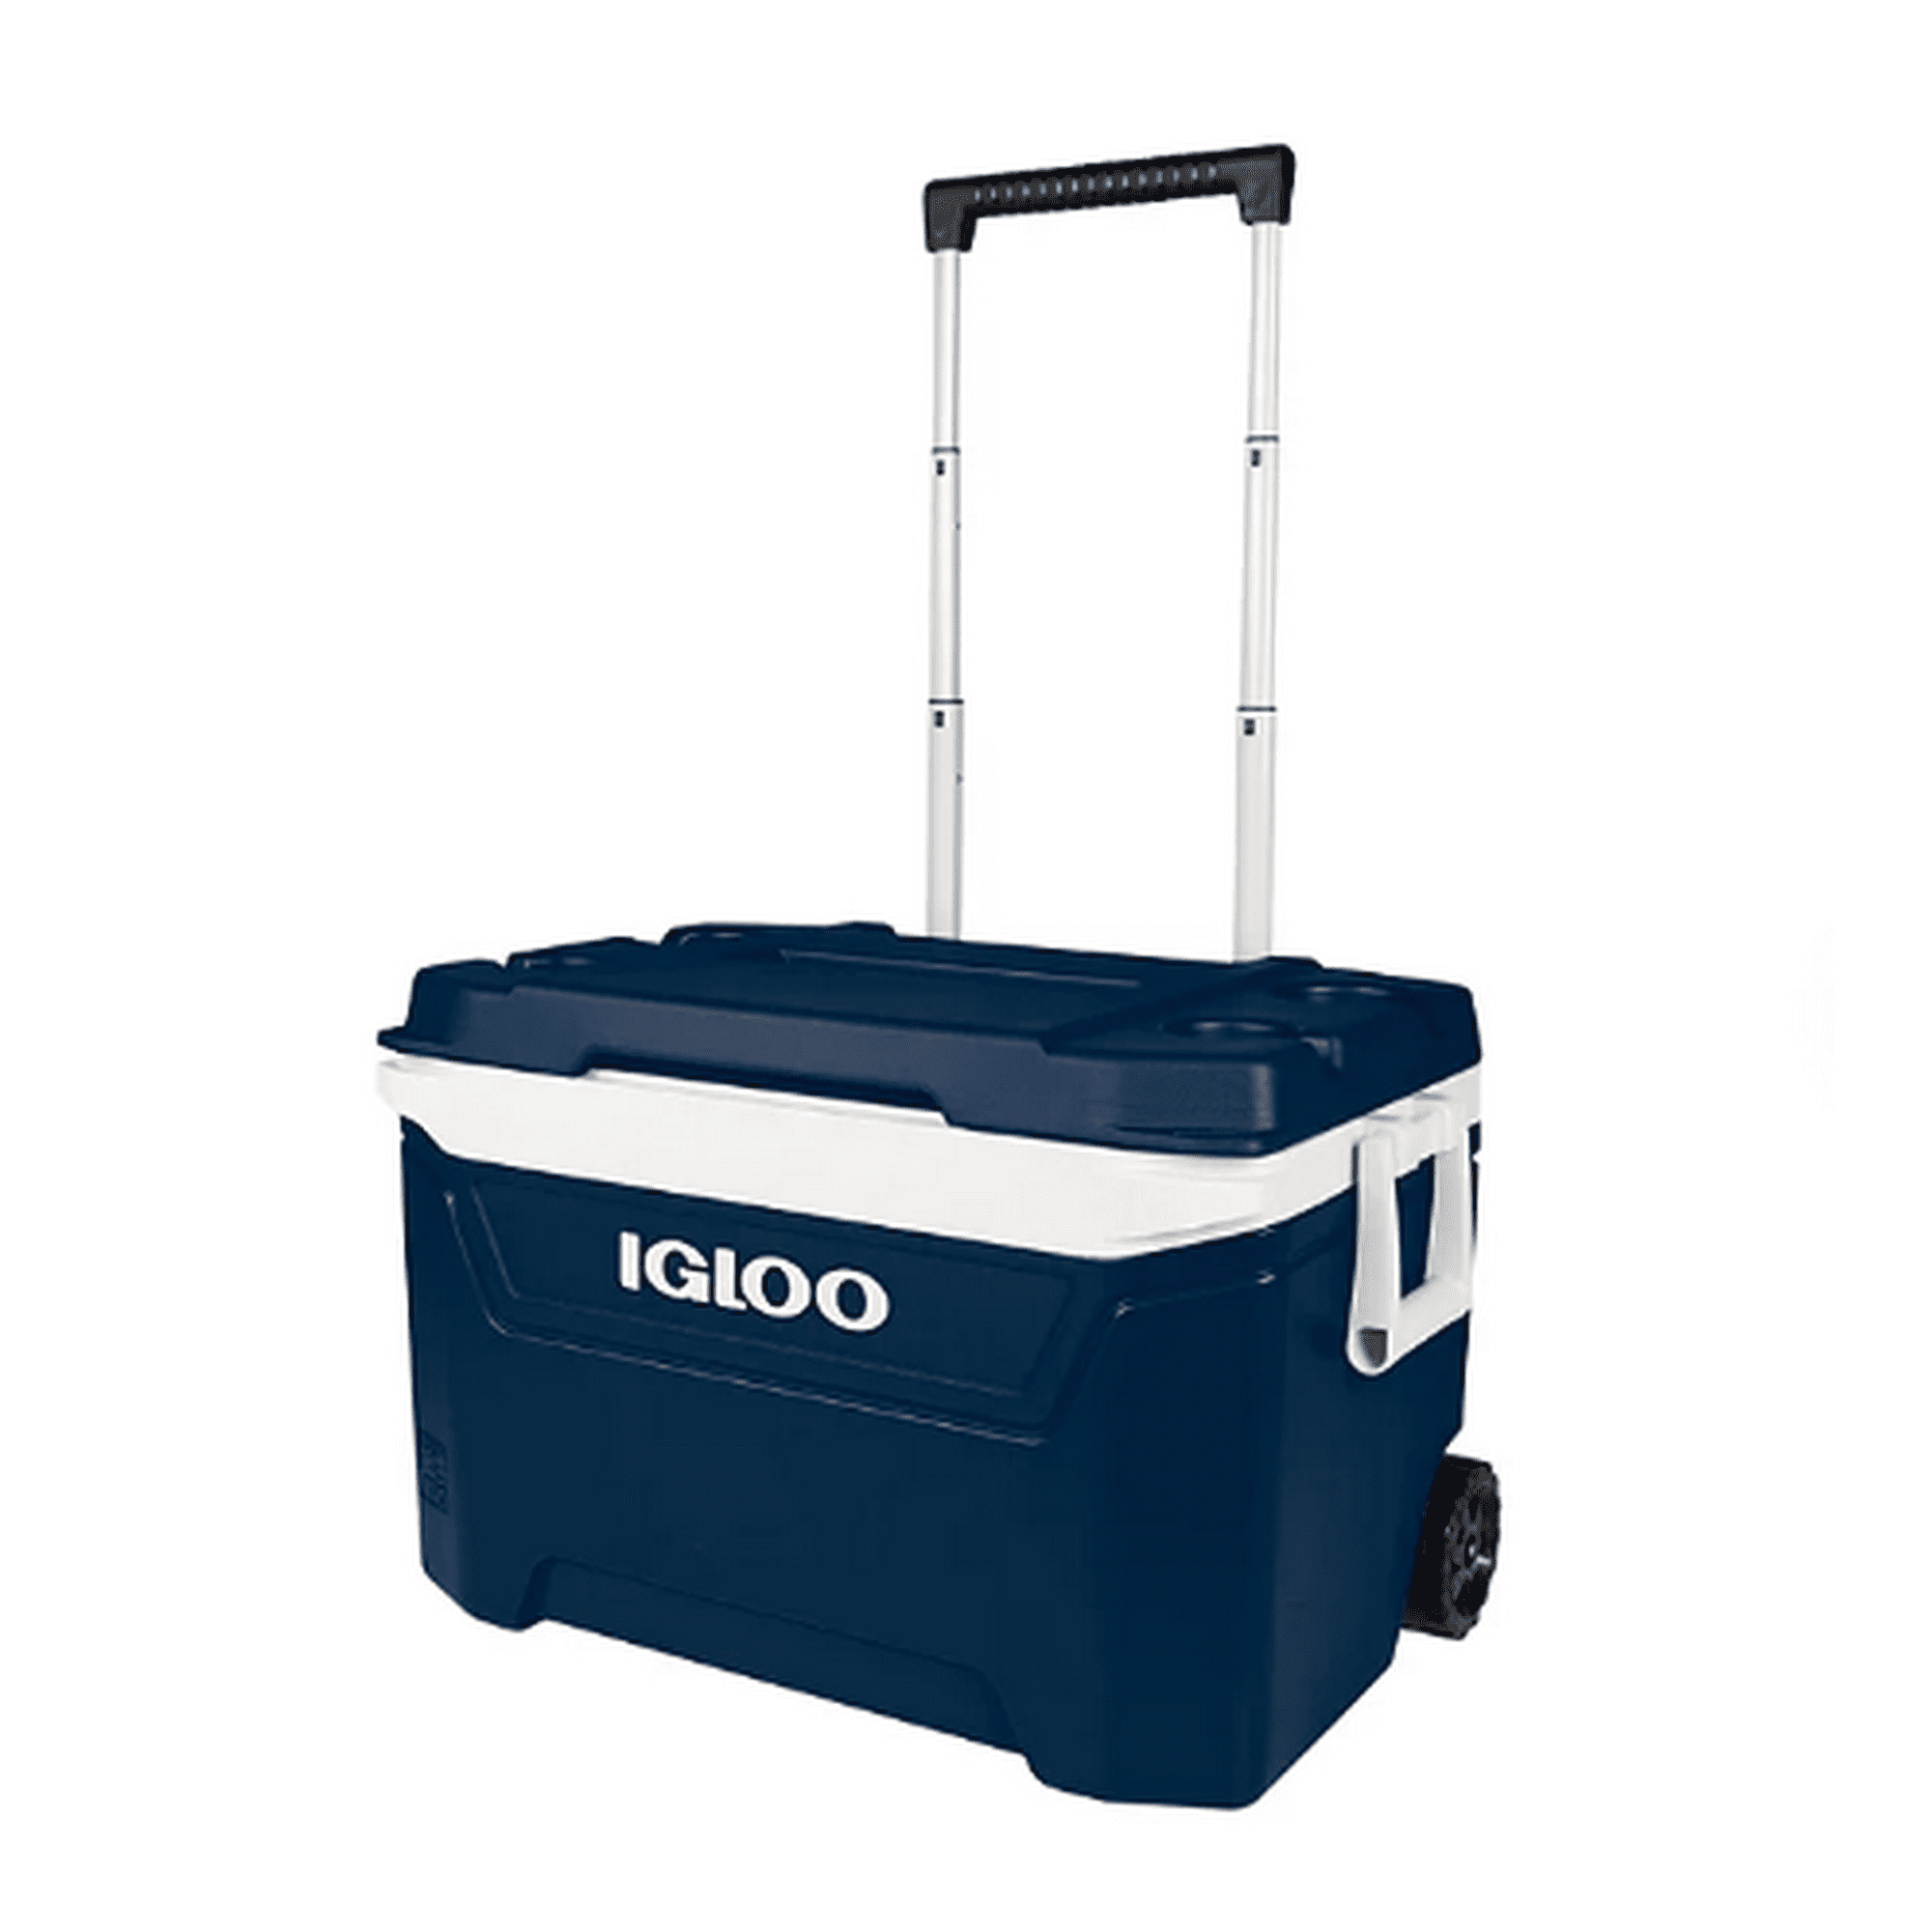 Igloo 60 Quart Sunset Roller Cooler Perfect Style & Style Storage Hold 94 12 oz. cans